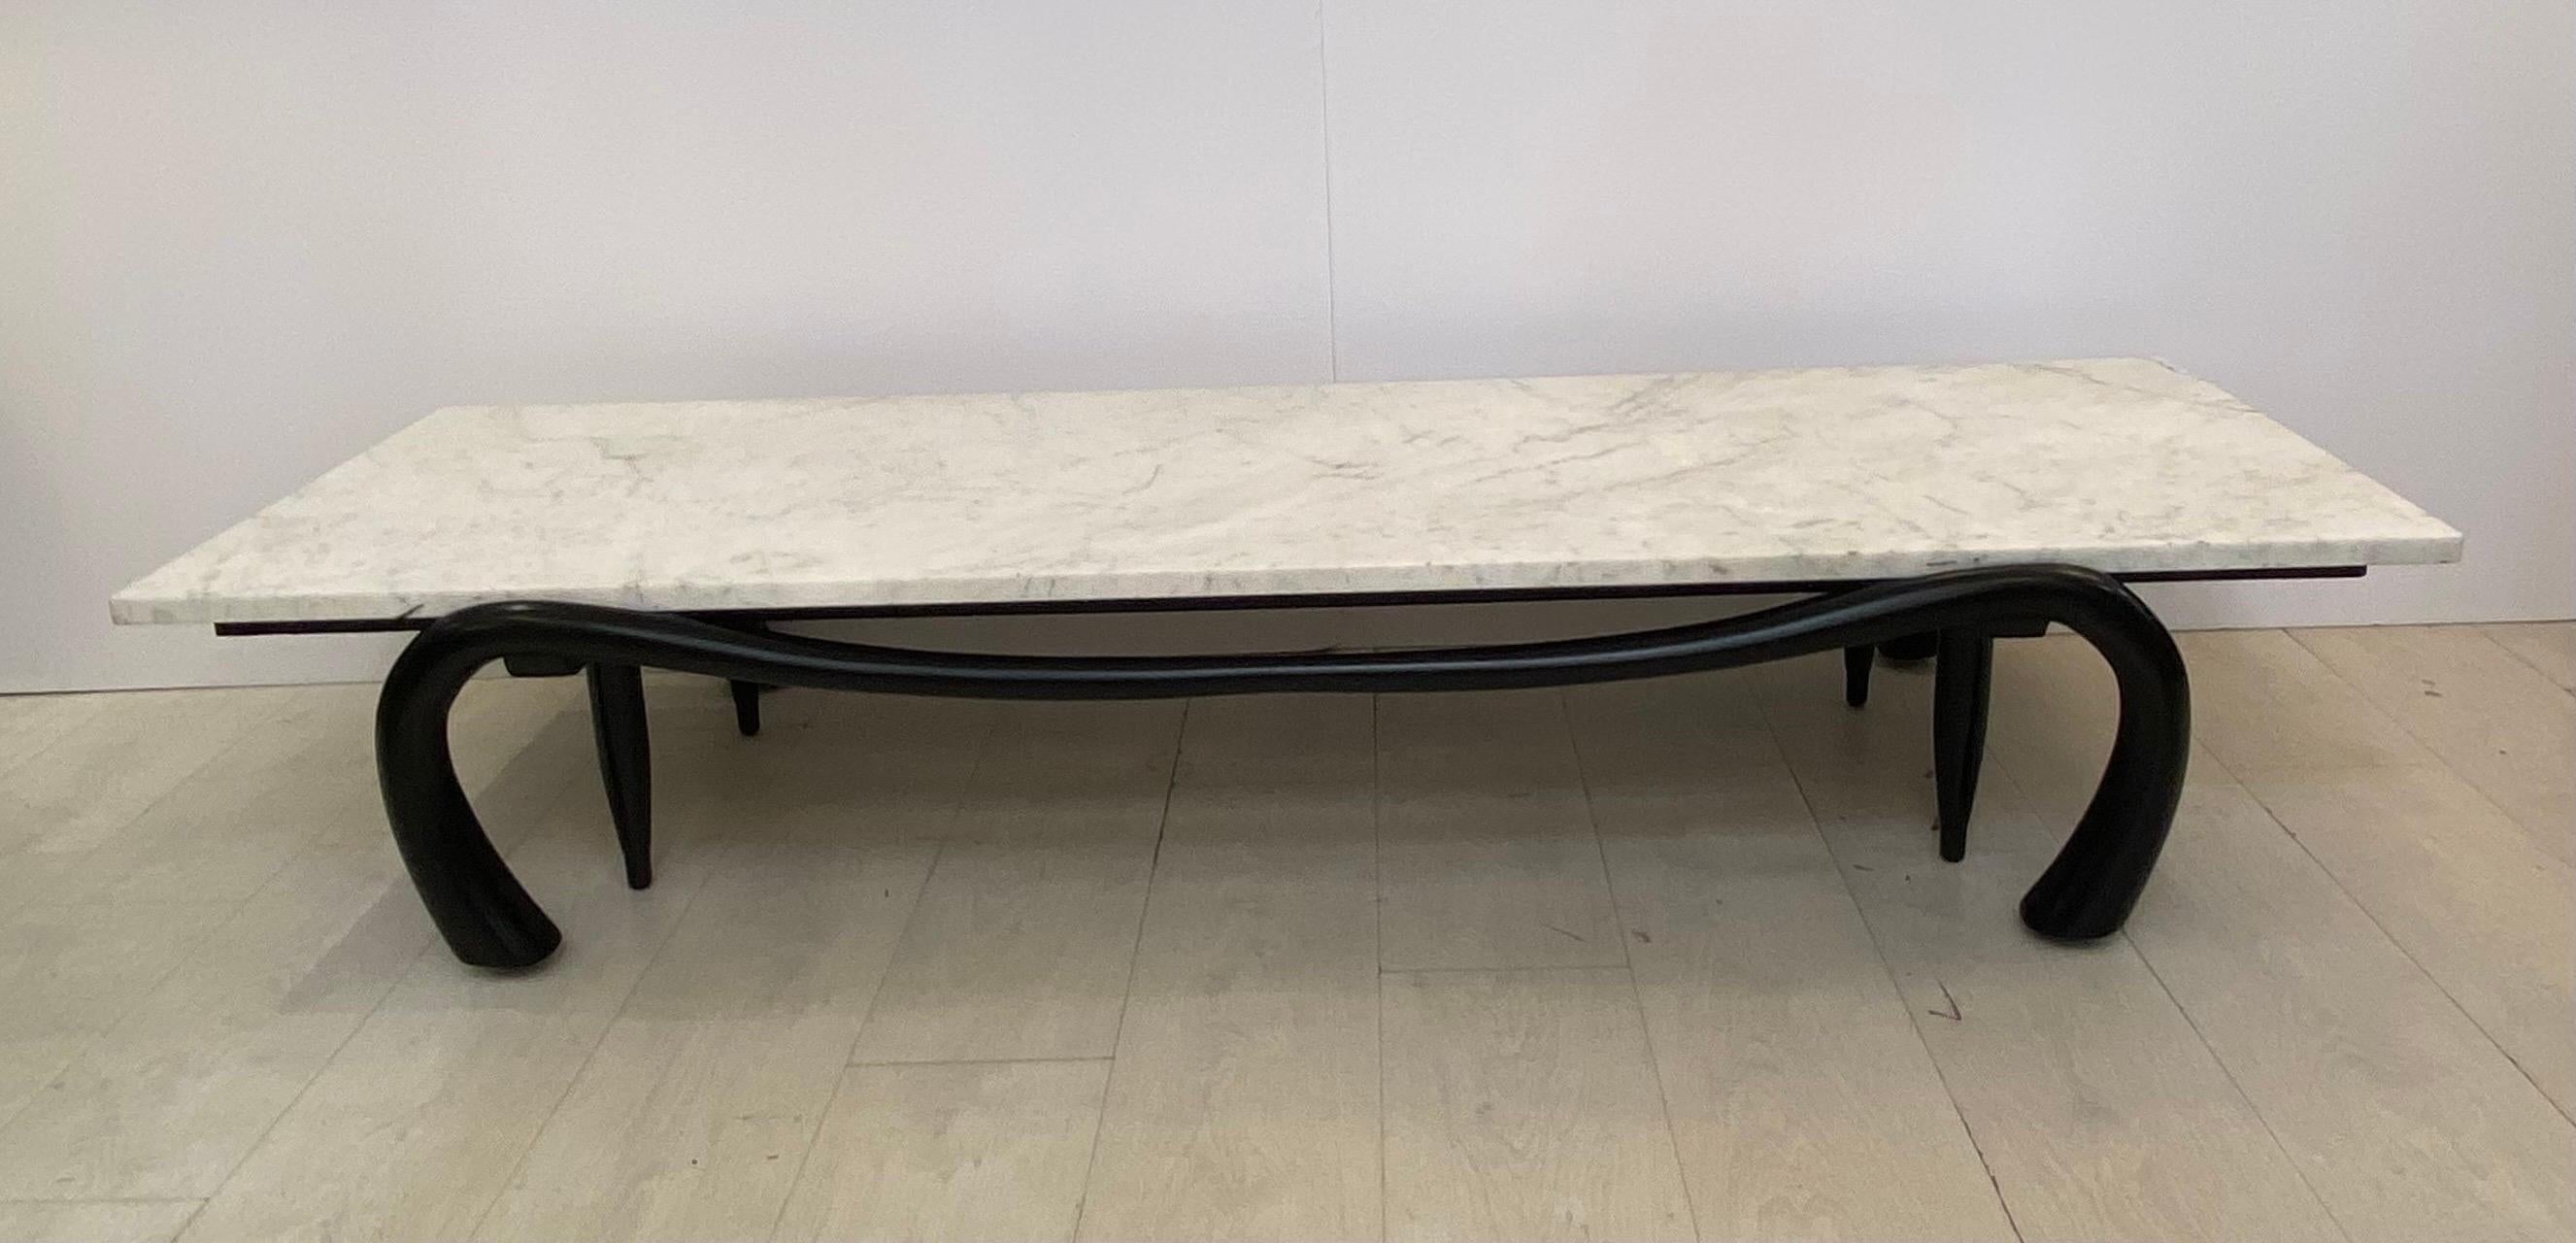 A freeform ebonized wood base with four interior support legs and four carved tapered and bent wooden outer legs… With a carrara marble top… An elegant design with complex construction circa 1960s… 24 inches deep by 68 1/2 inches long by 12 1/2